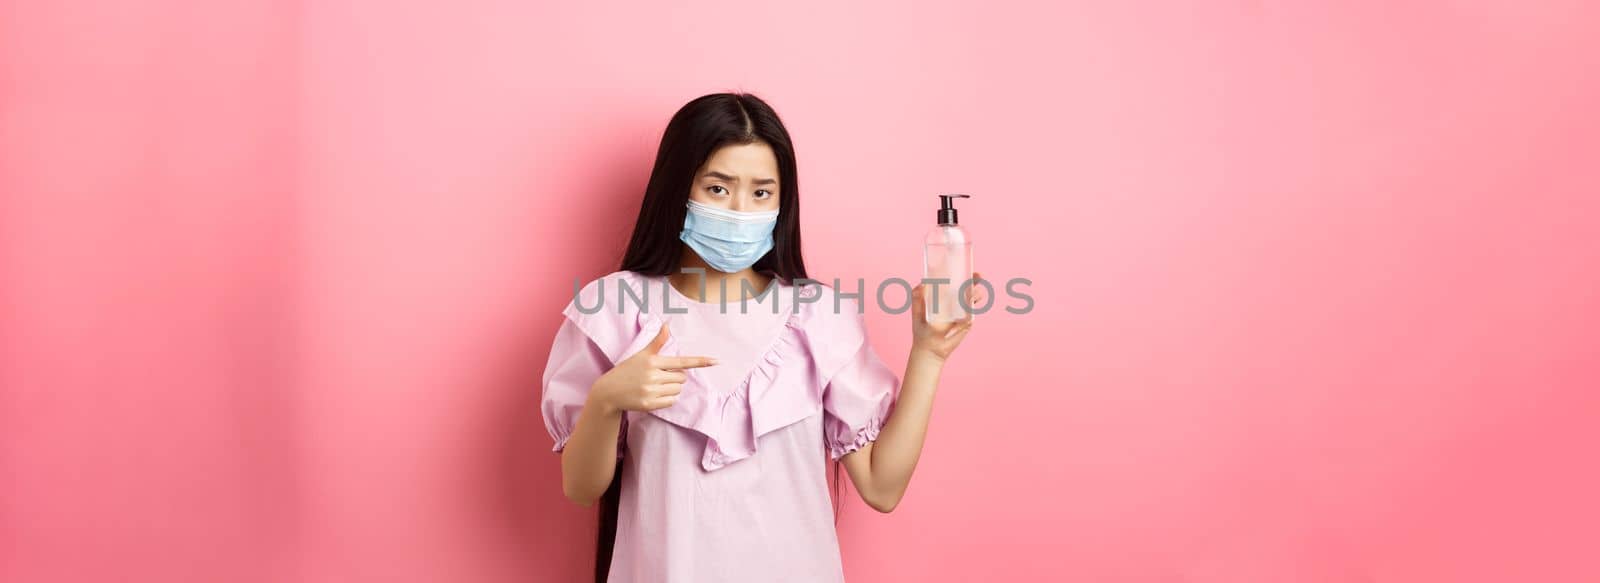 Healthy people and covid-19 pandemic concept. Skeptical asian woman frowning, wearing face mask, pointing at bottle of hand sanitizer, standing against pink background by Benzoix